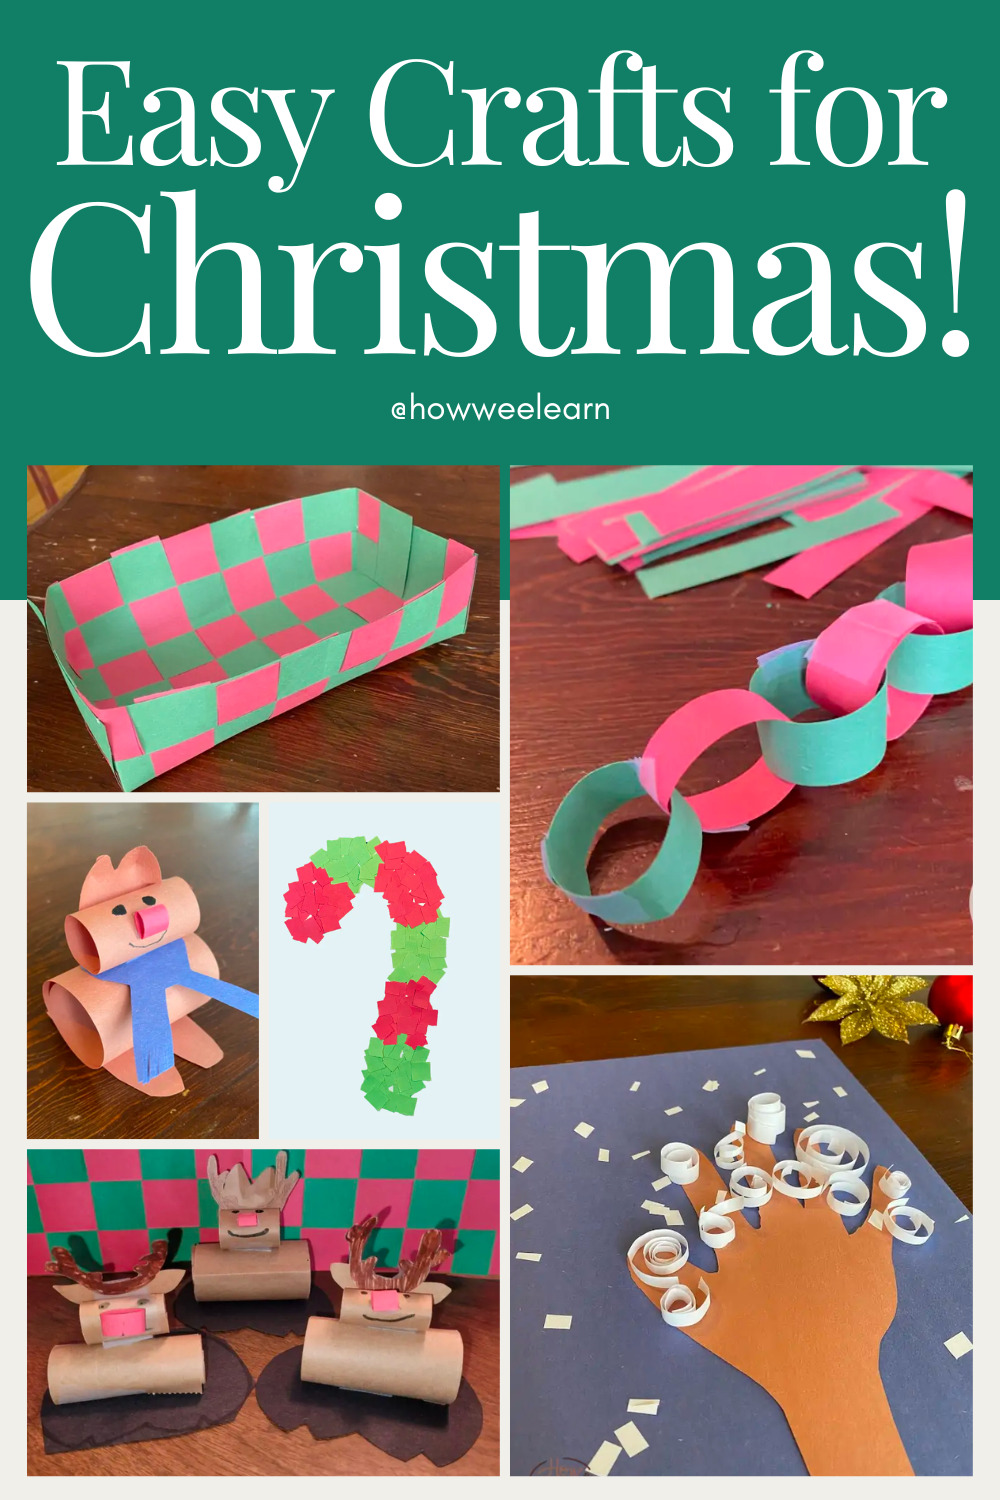 5 Days of Paper Christmas Crafts - How Wee Learn